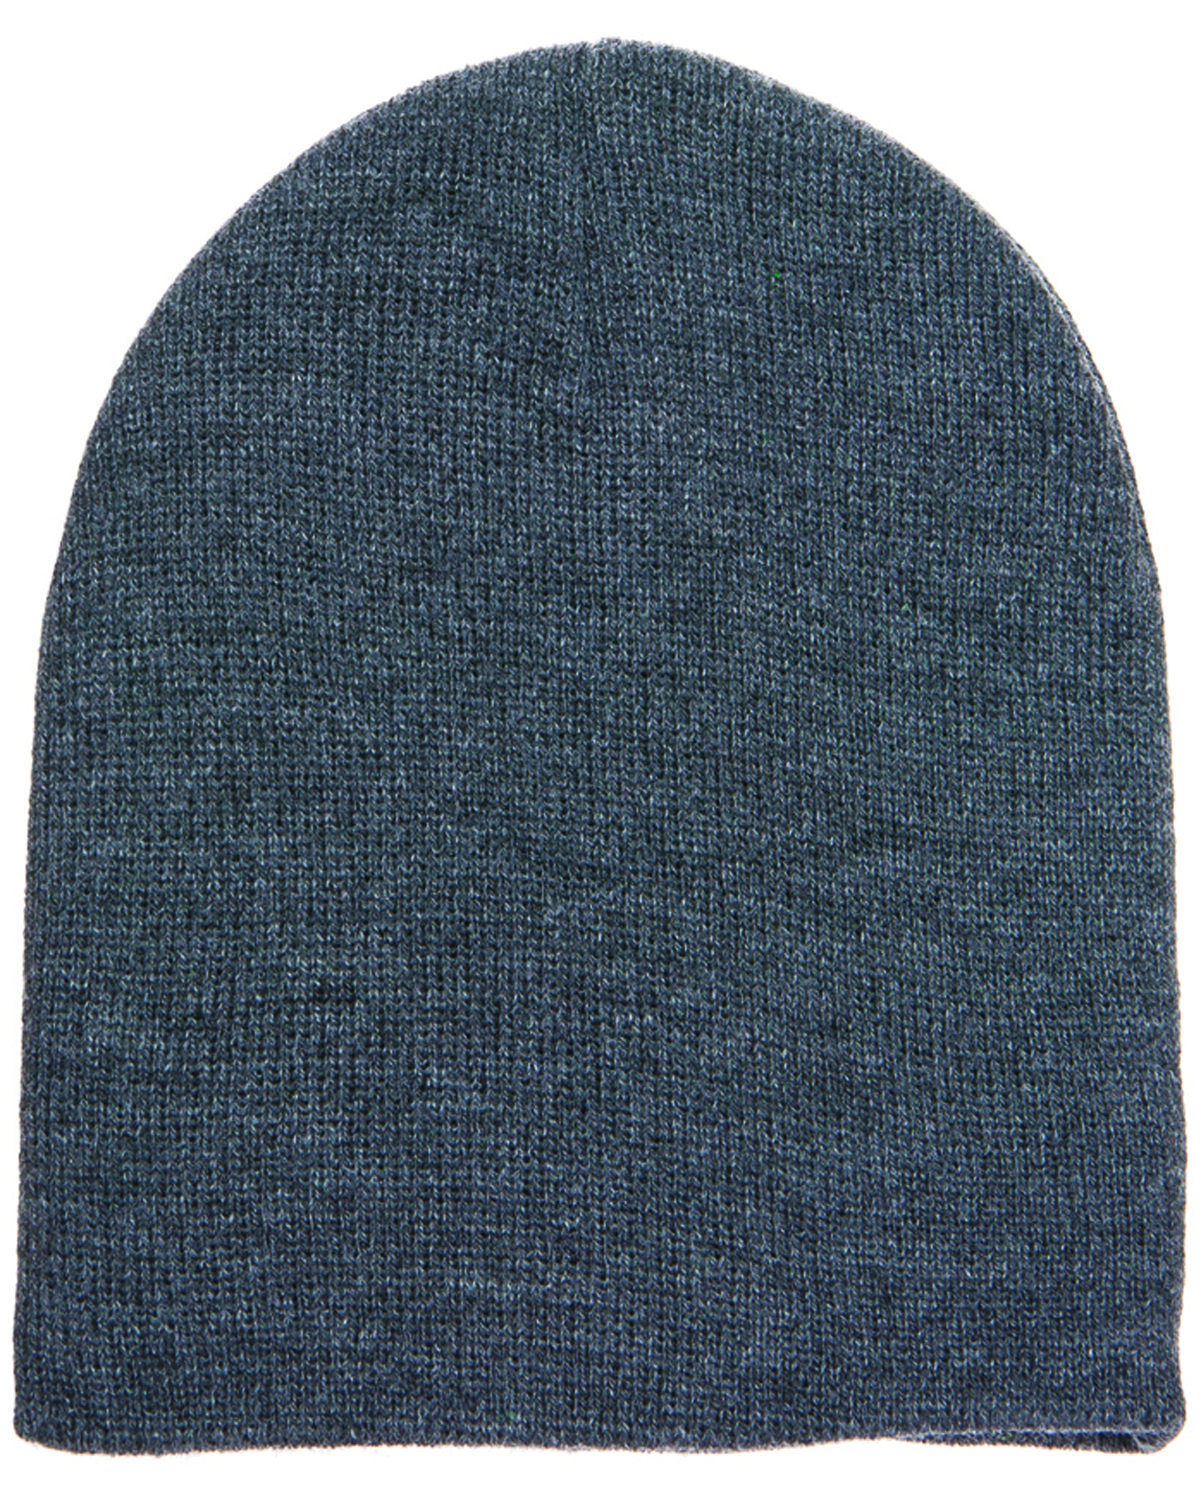 Yupoong | alphabroder Adult Beanie Knit